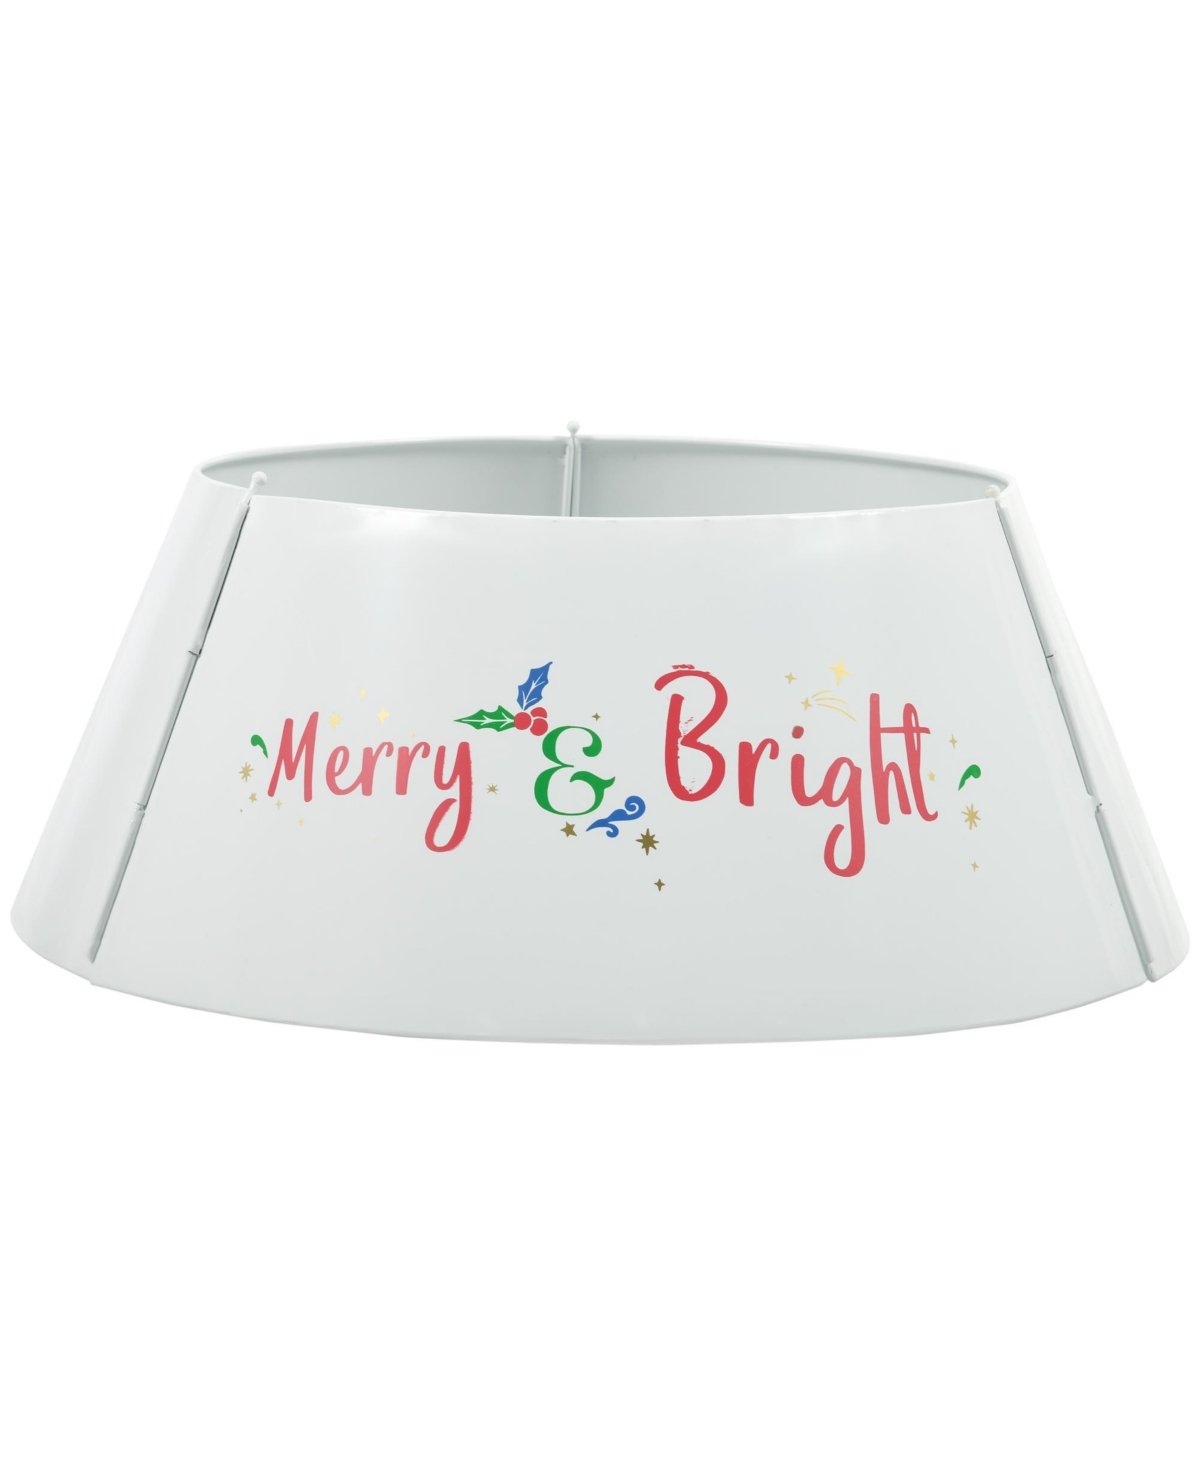 26 Inch Christmas Tree Collar Ring, Stand Cover for Decor, White - White